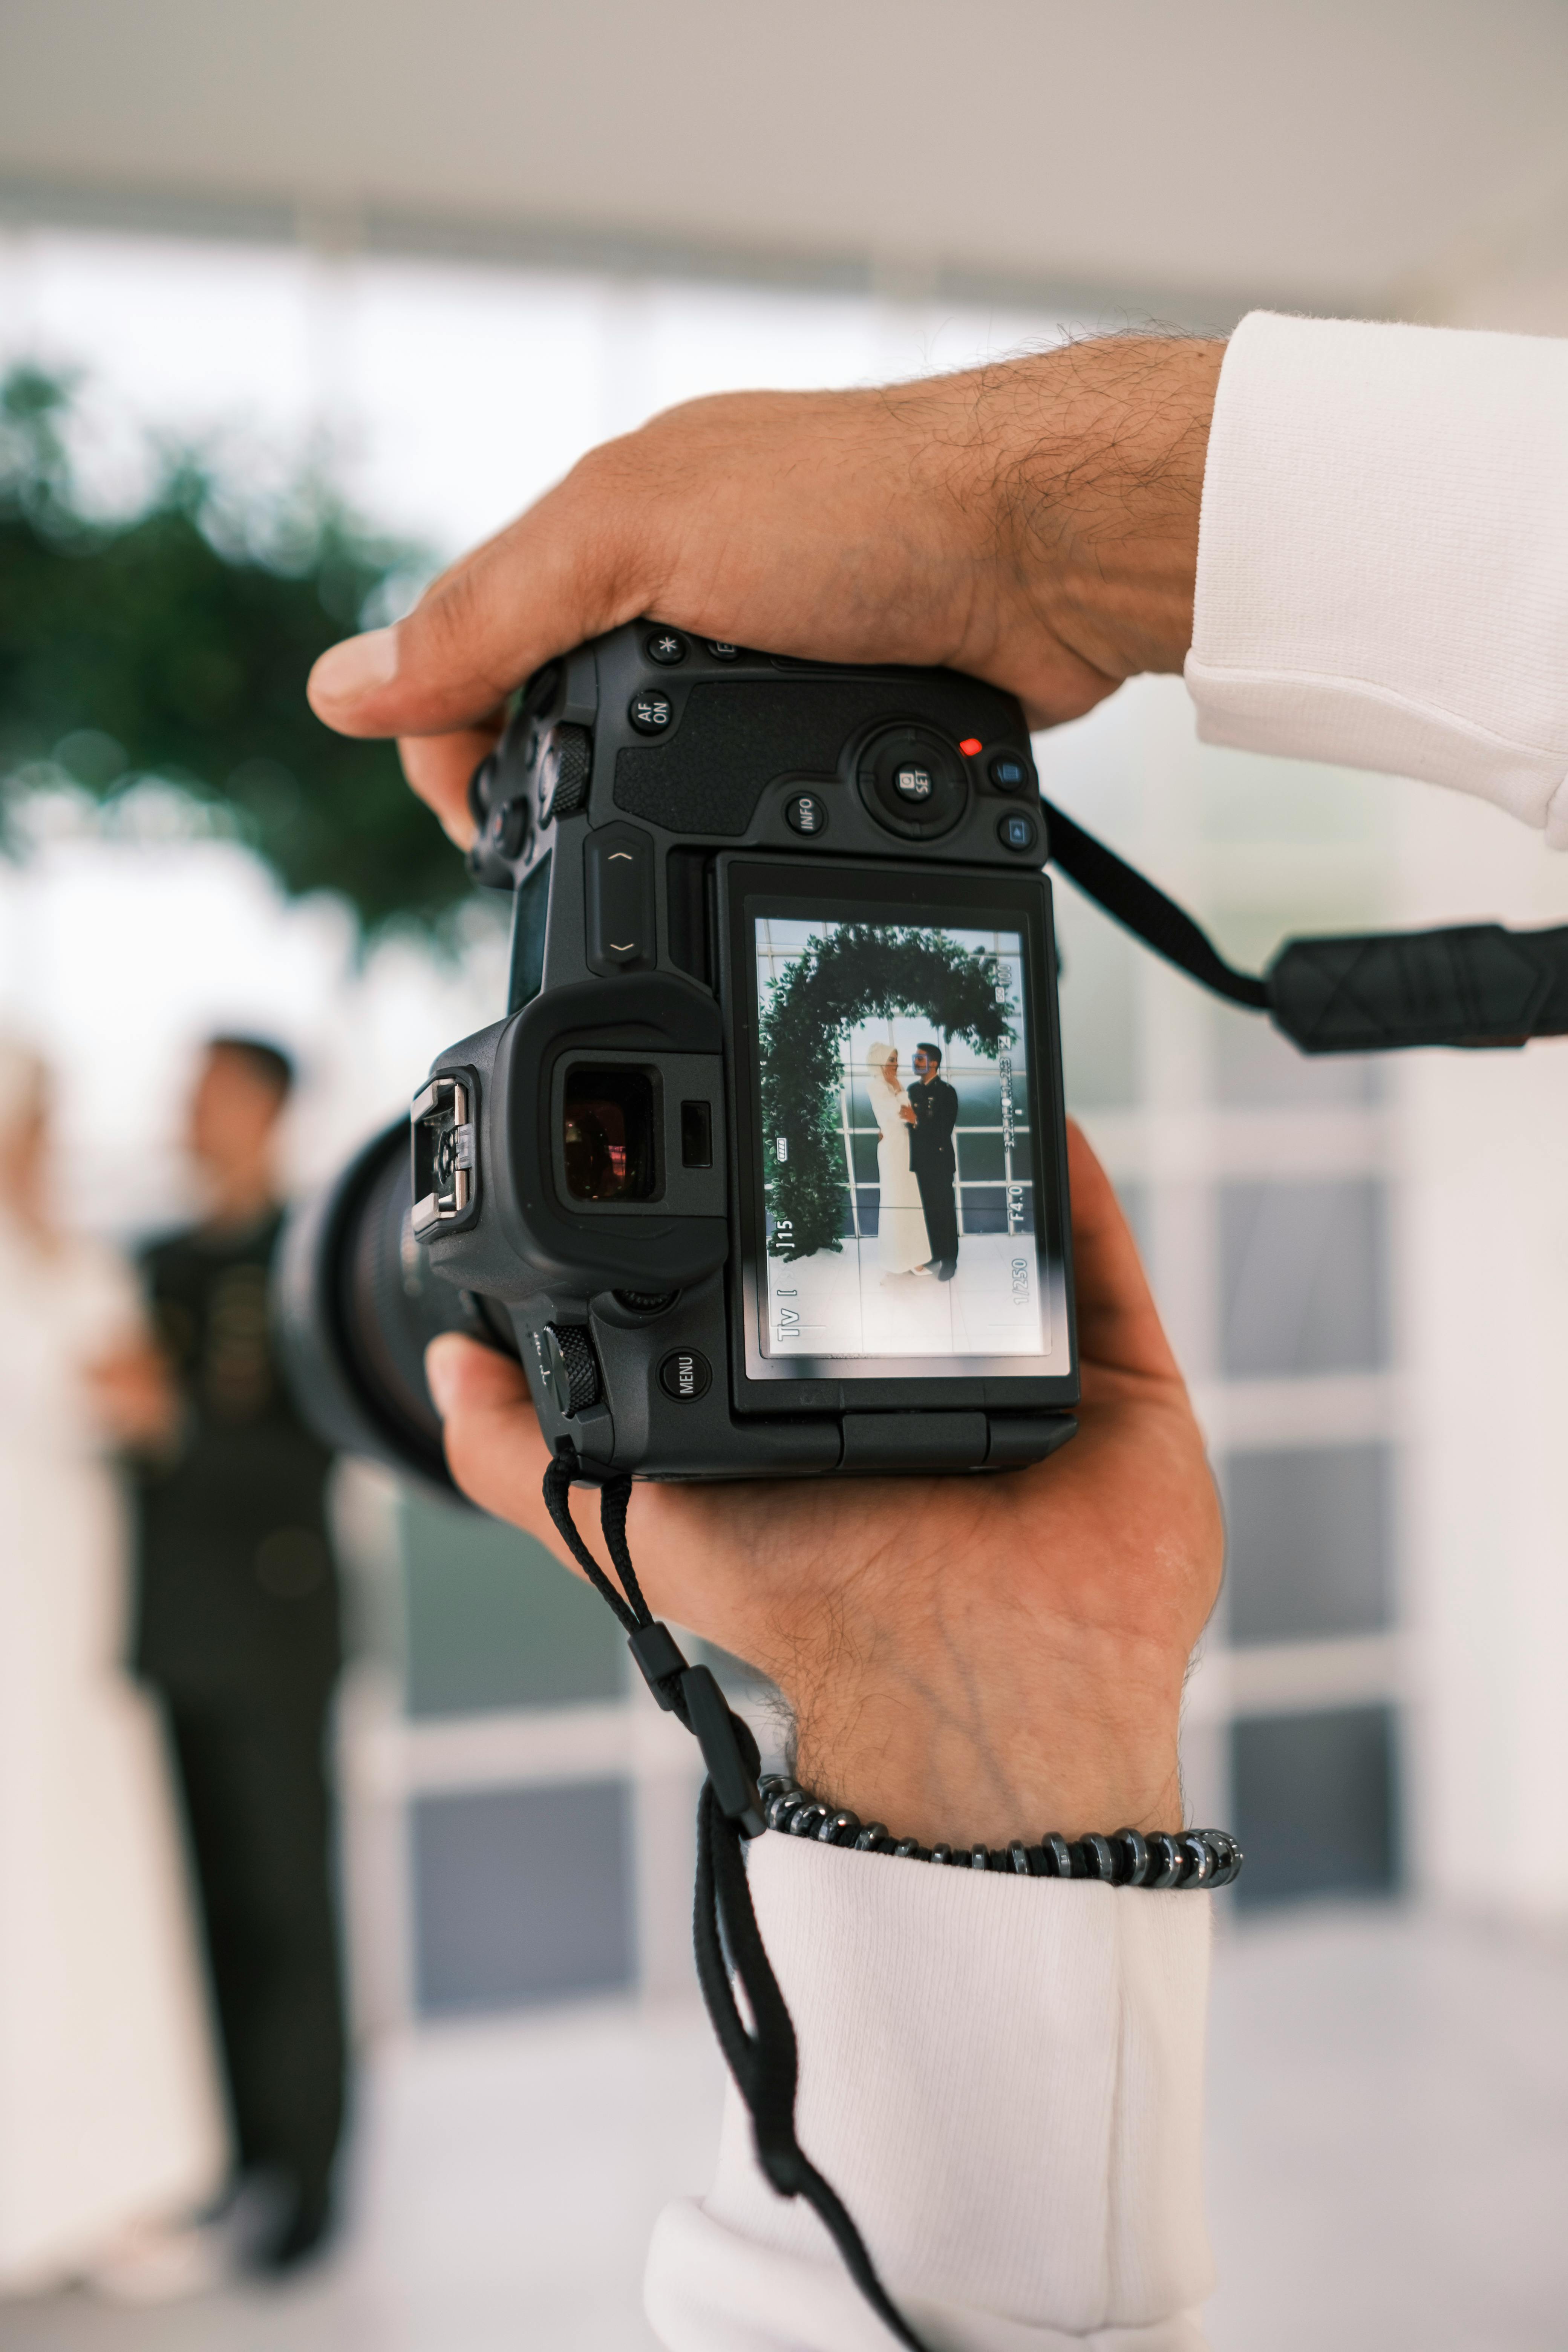 A wedding photographer taking a shot on his camera | Source: Pexels